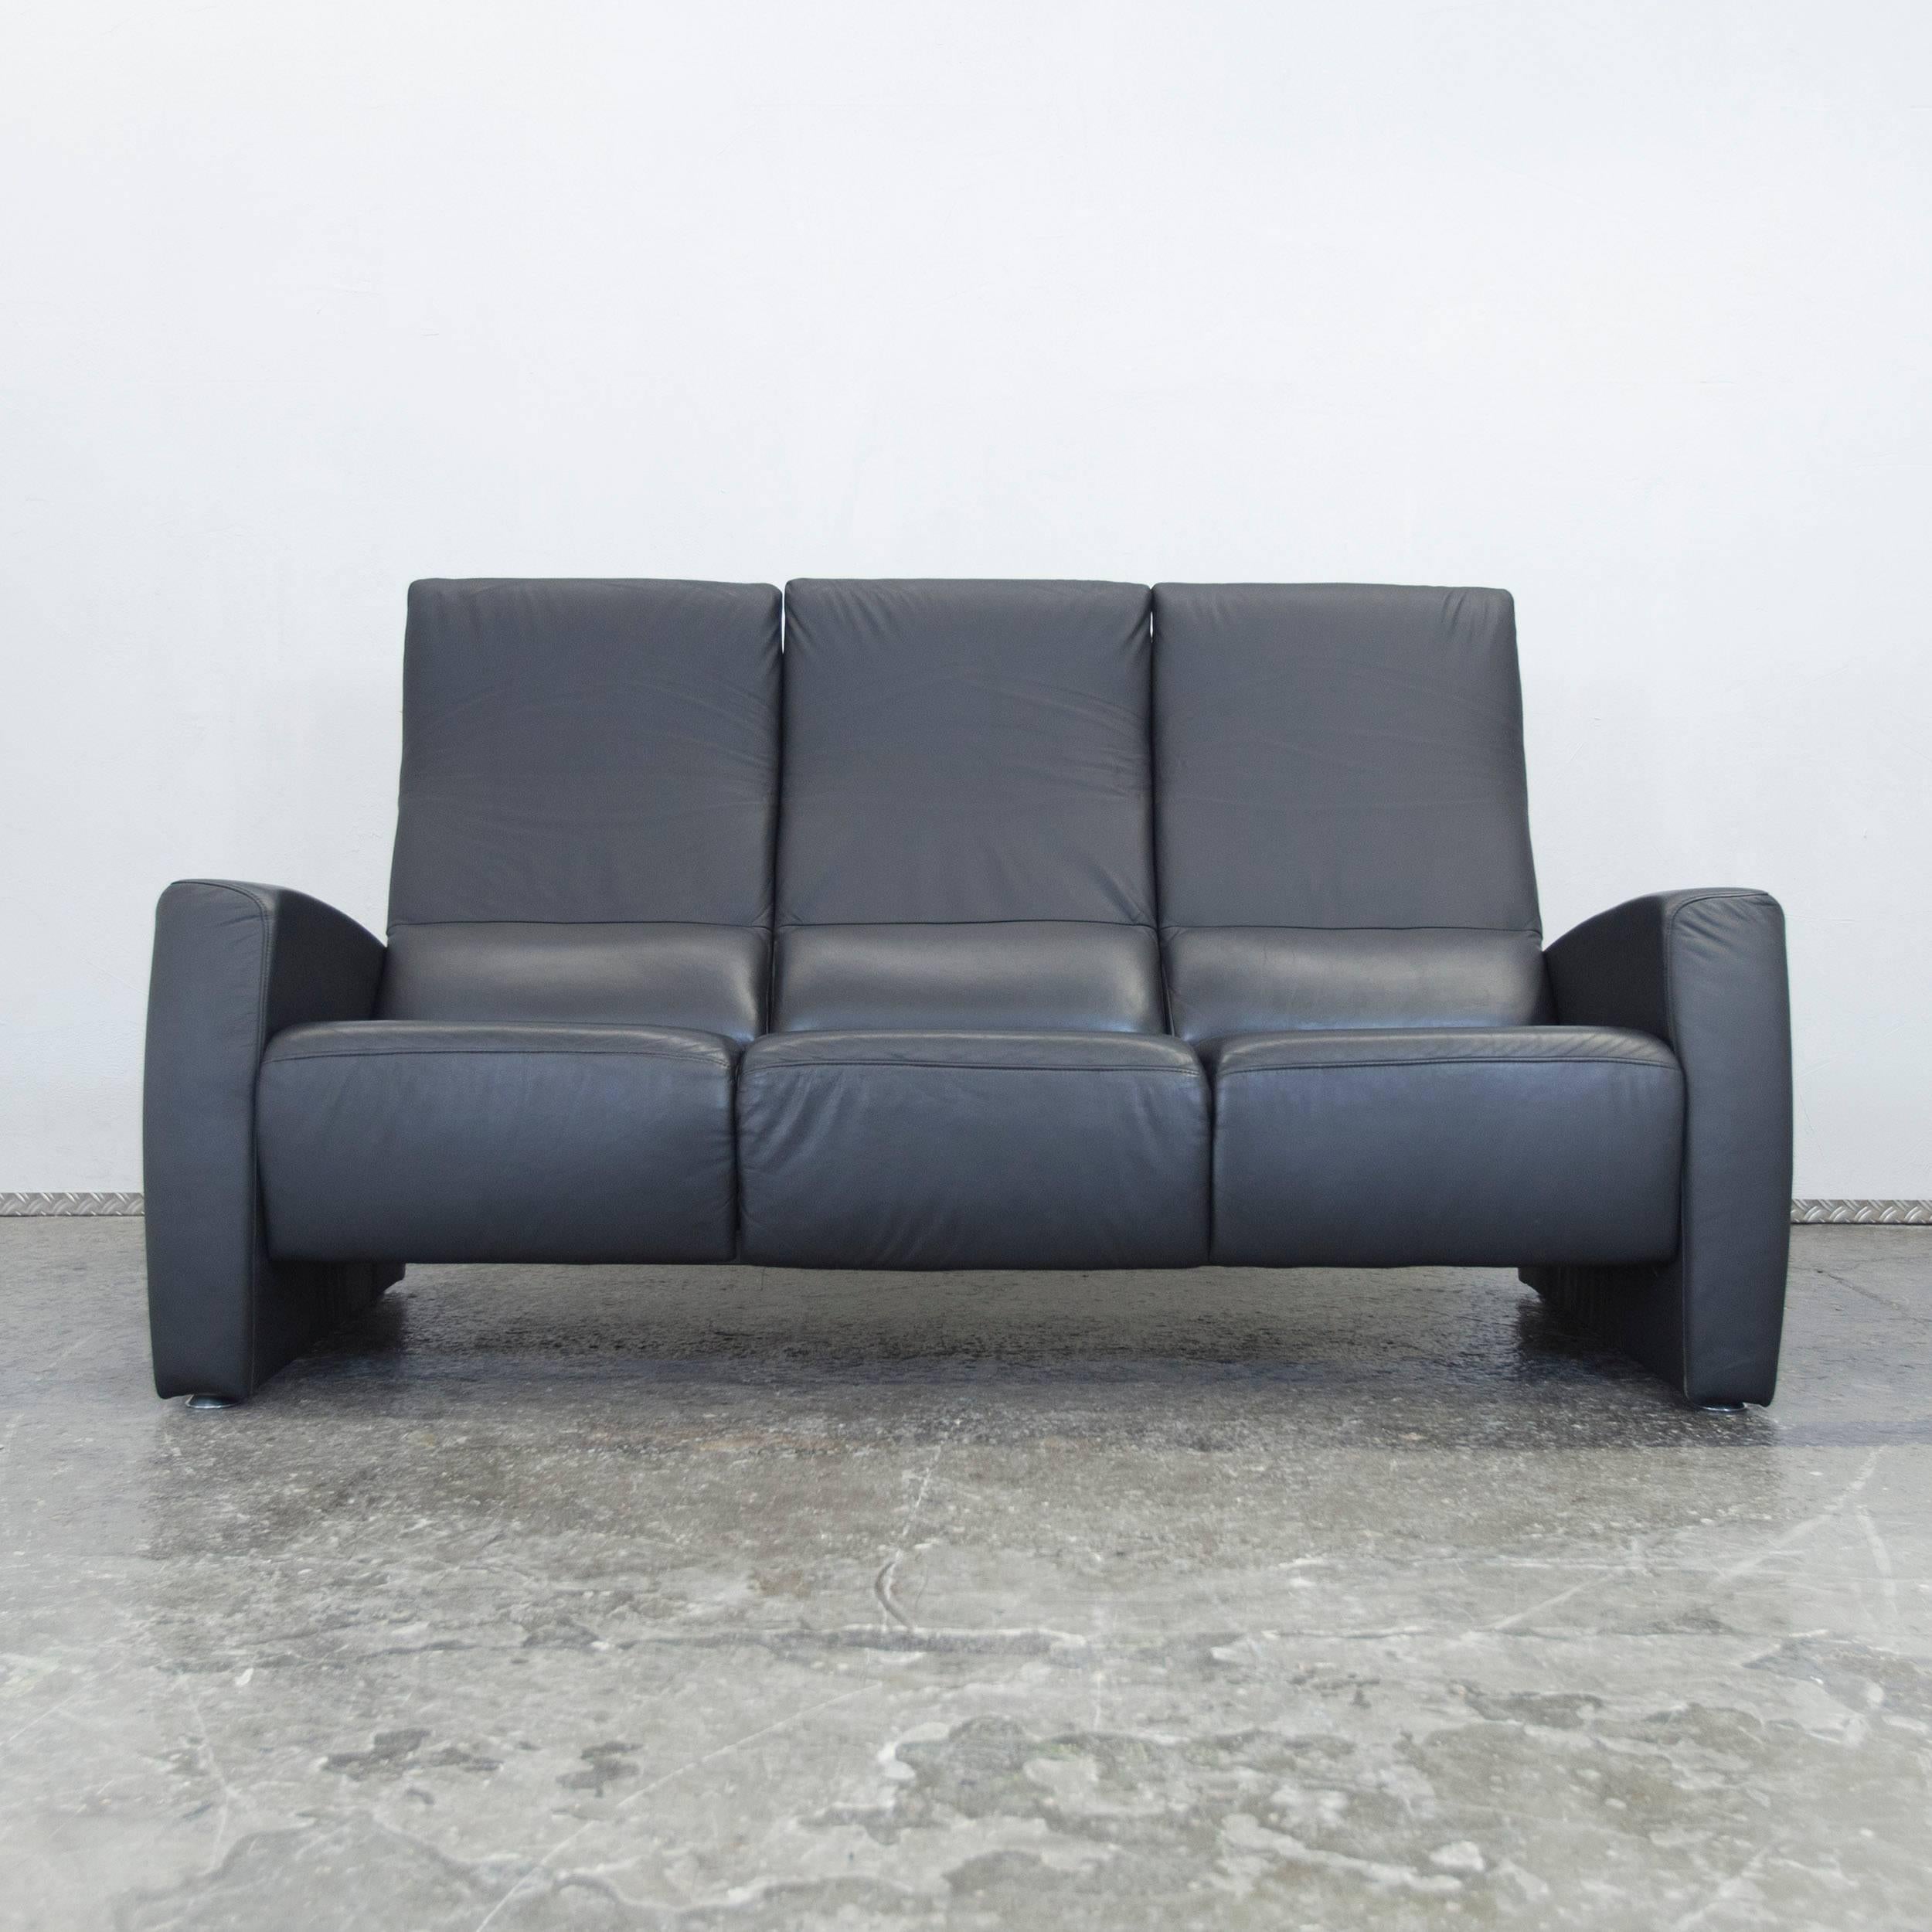 Designer Leather Sofa Black Three-Seat Couch Function Modern In Excellent Condition For Sale In Cologne, DE